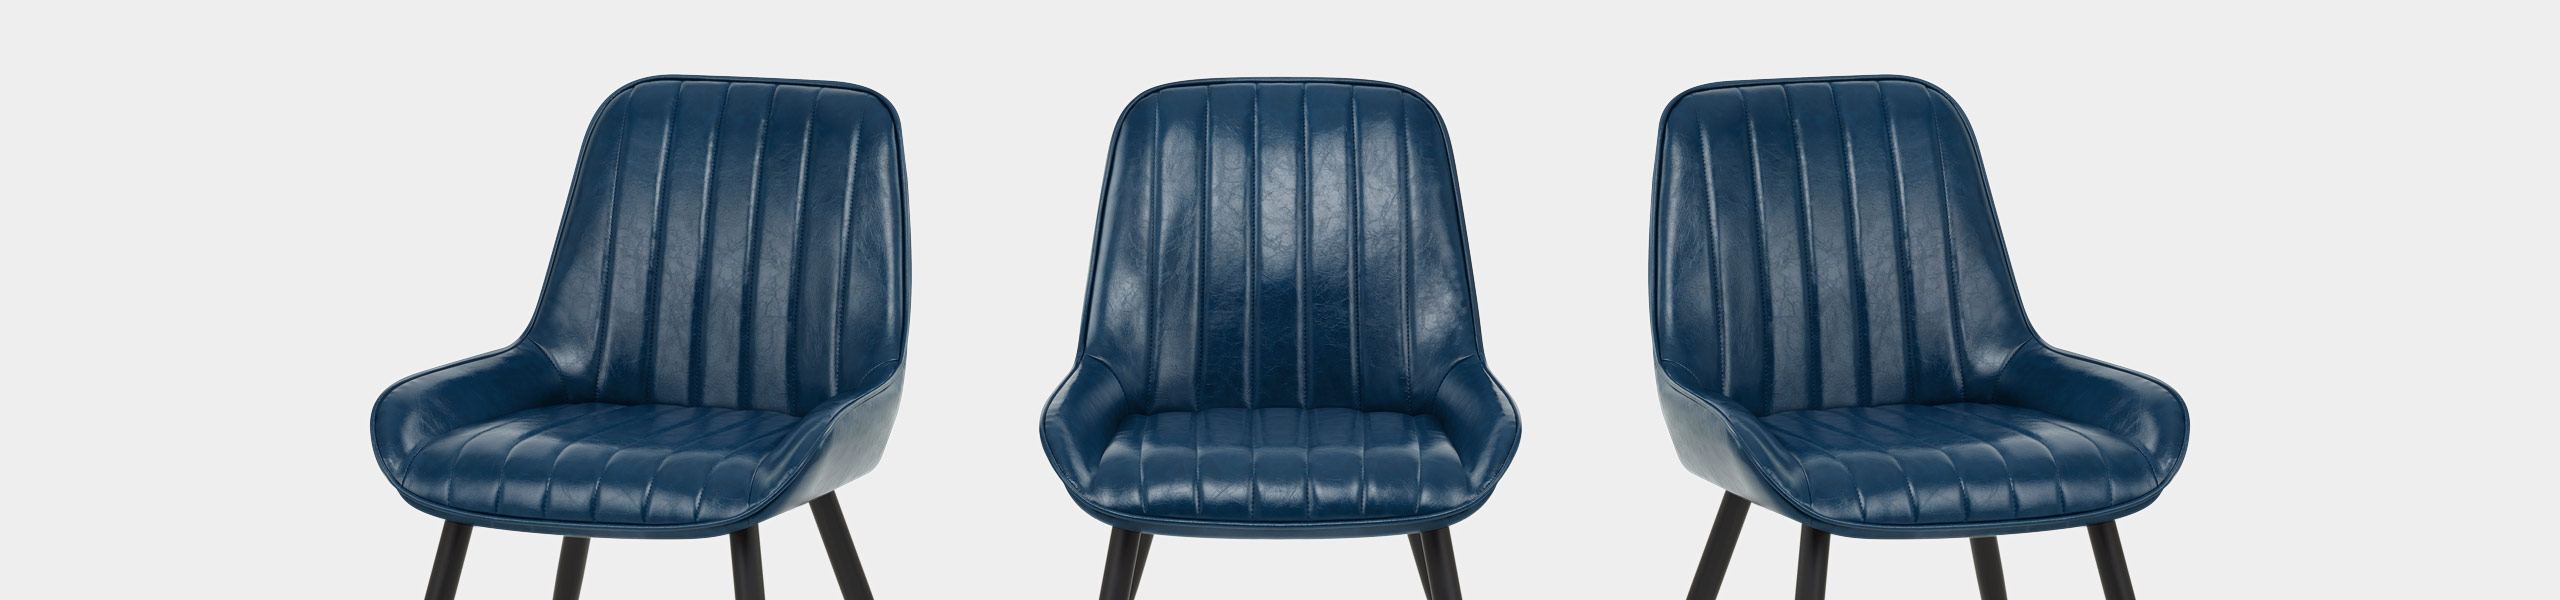 Mustang Chair Antique Blue Video Banner